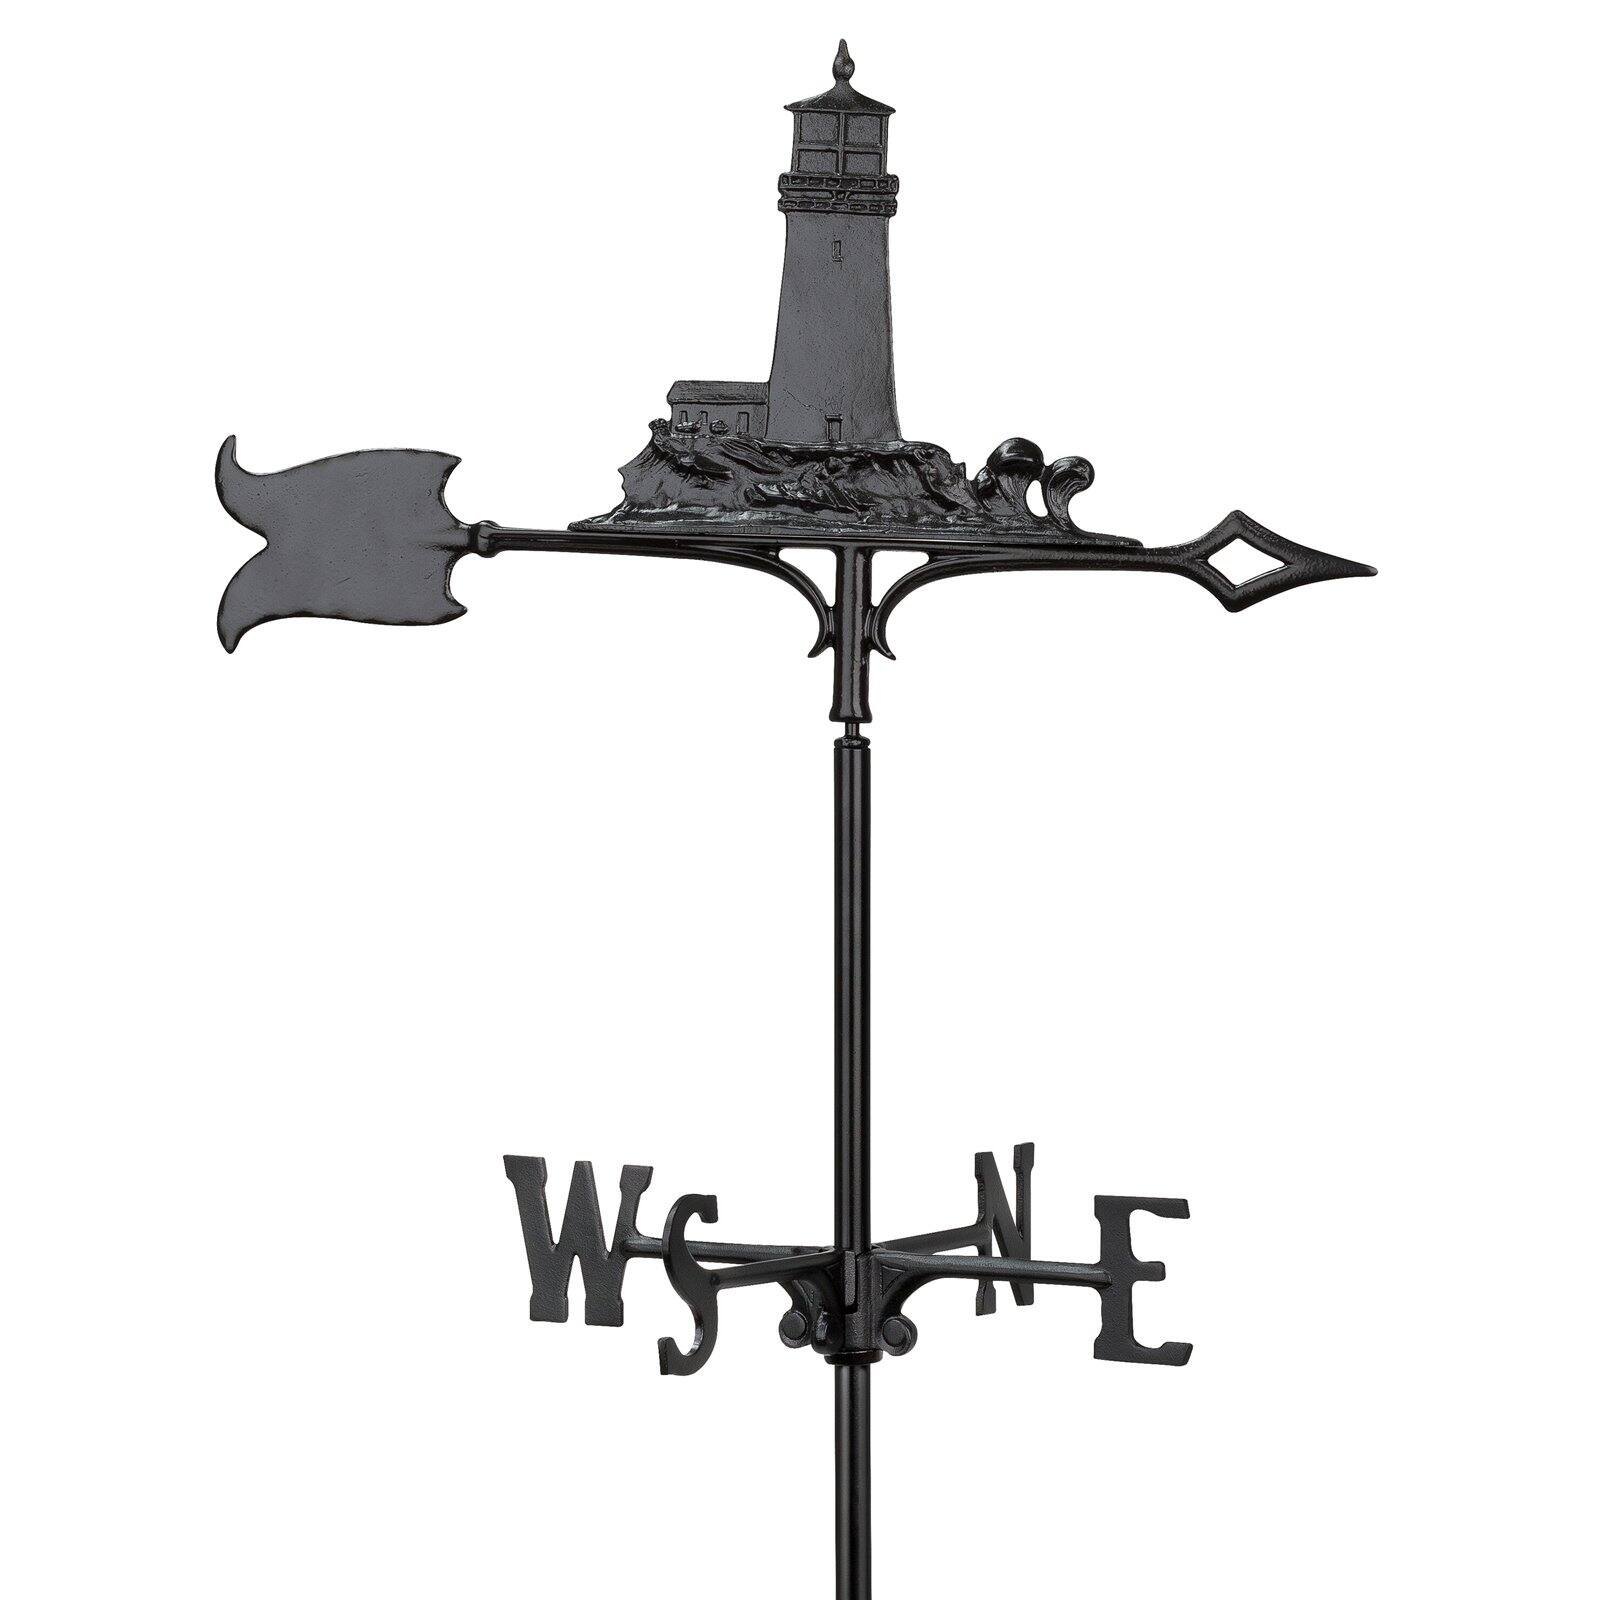 Nautical Collection 65355 30 Lighthouse Weathervane in Black - image 2 of 2